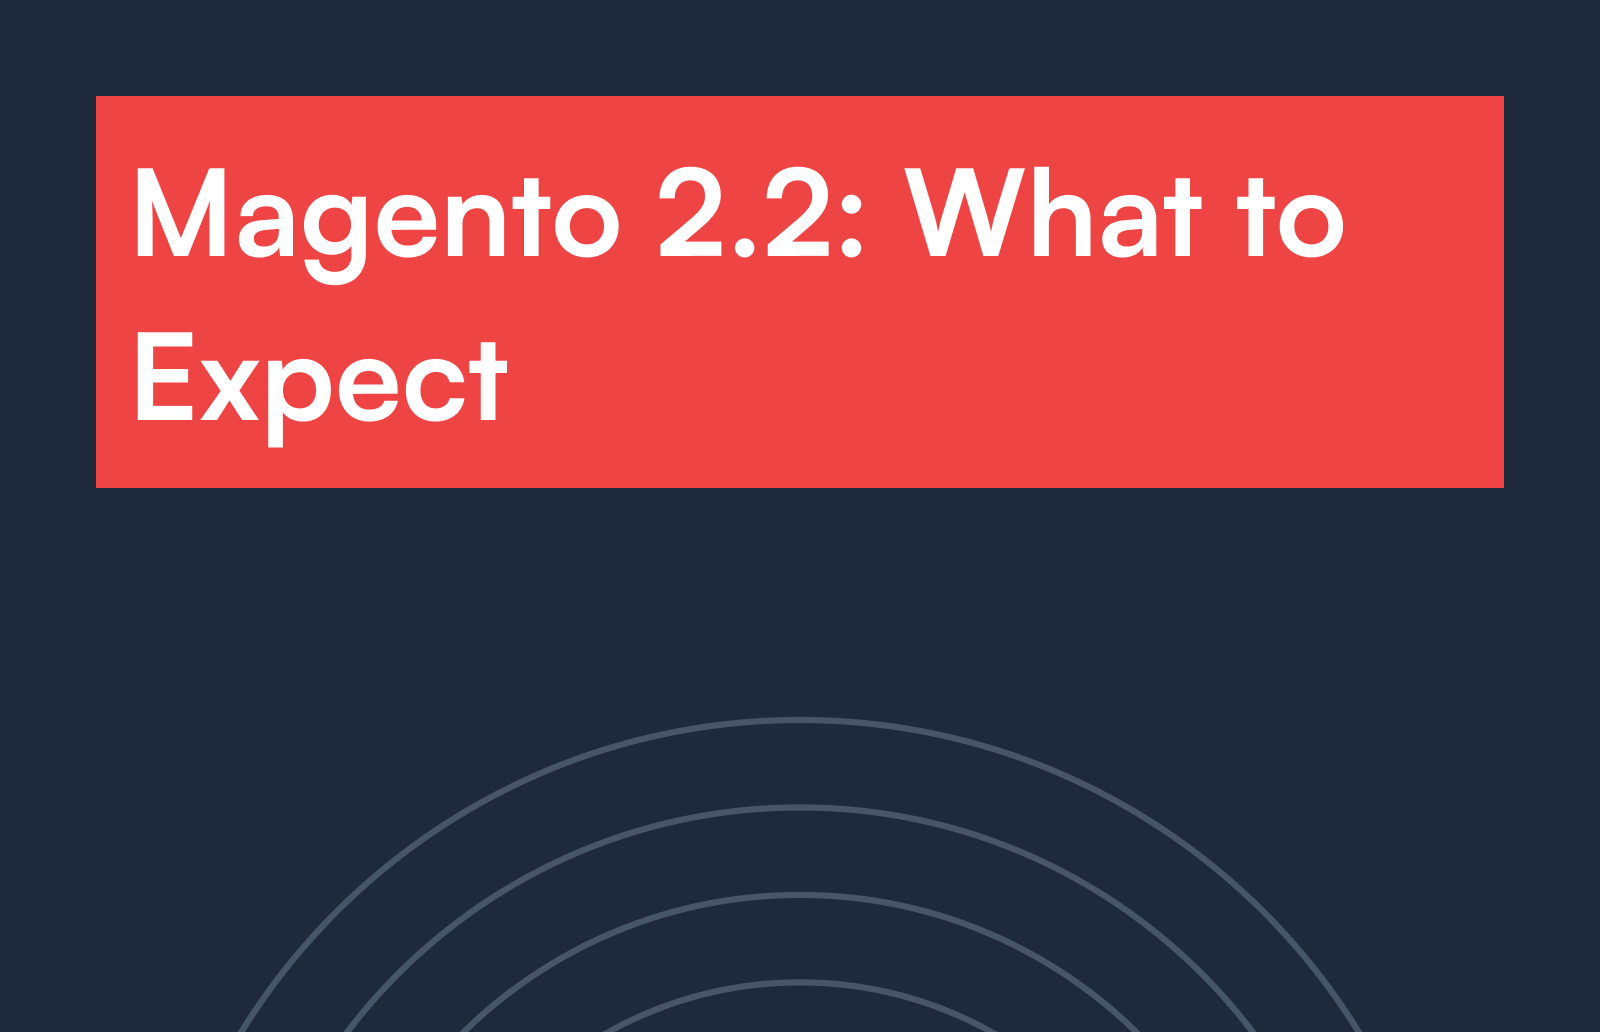 Magento 2.2: What to Expect